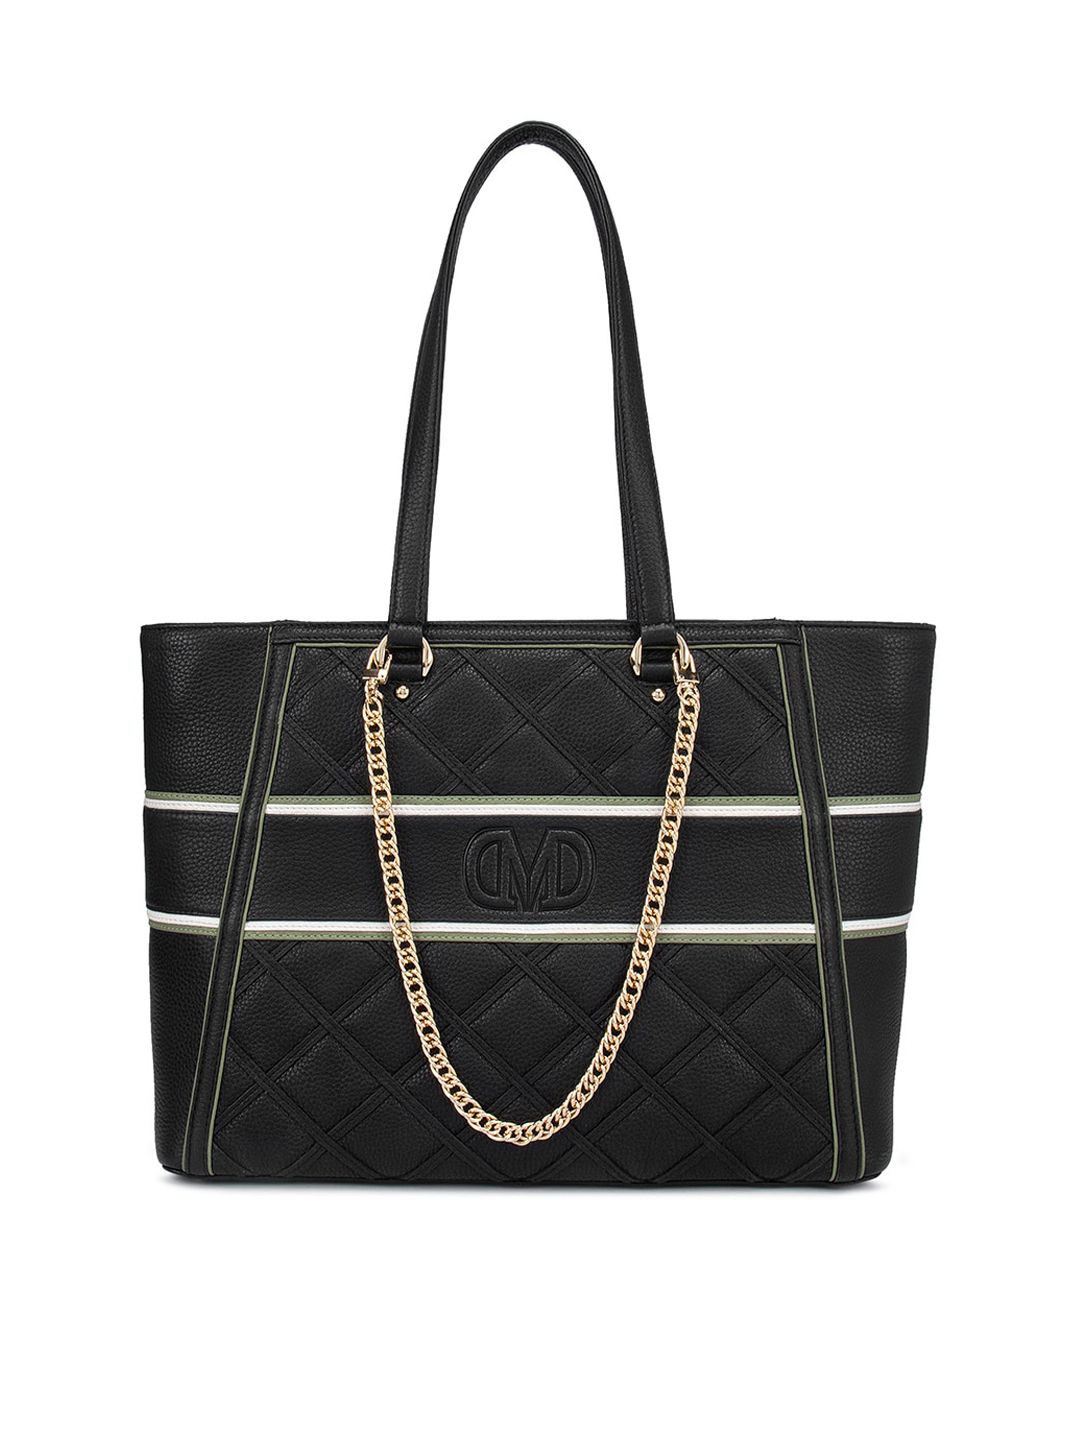 Da Milano Black Leather Oversized Shopper Shoulder Bag with Quilted Price in India